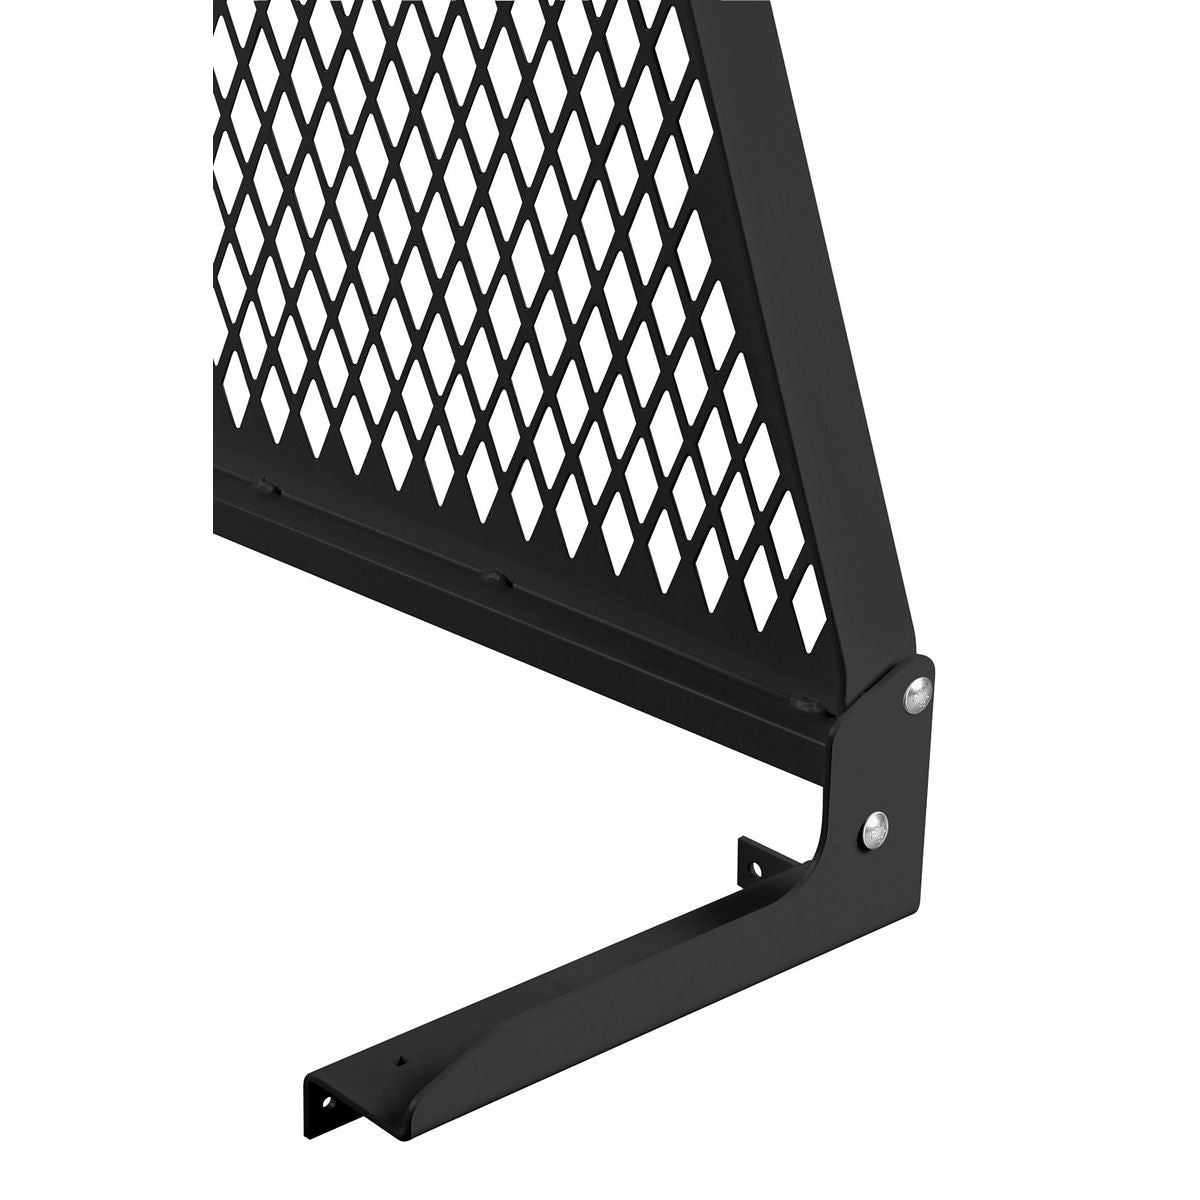 American Ladders & Scaffolds, WeatherGuard Cab Protector Mounting Kit